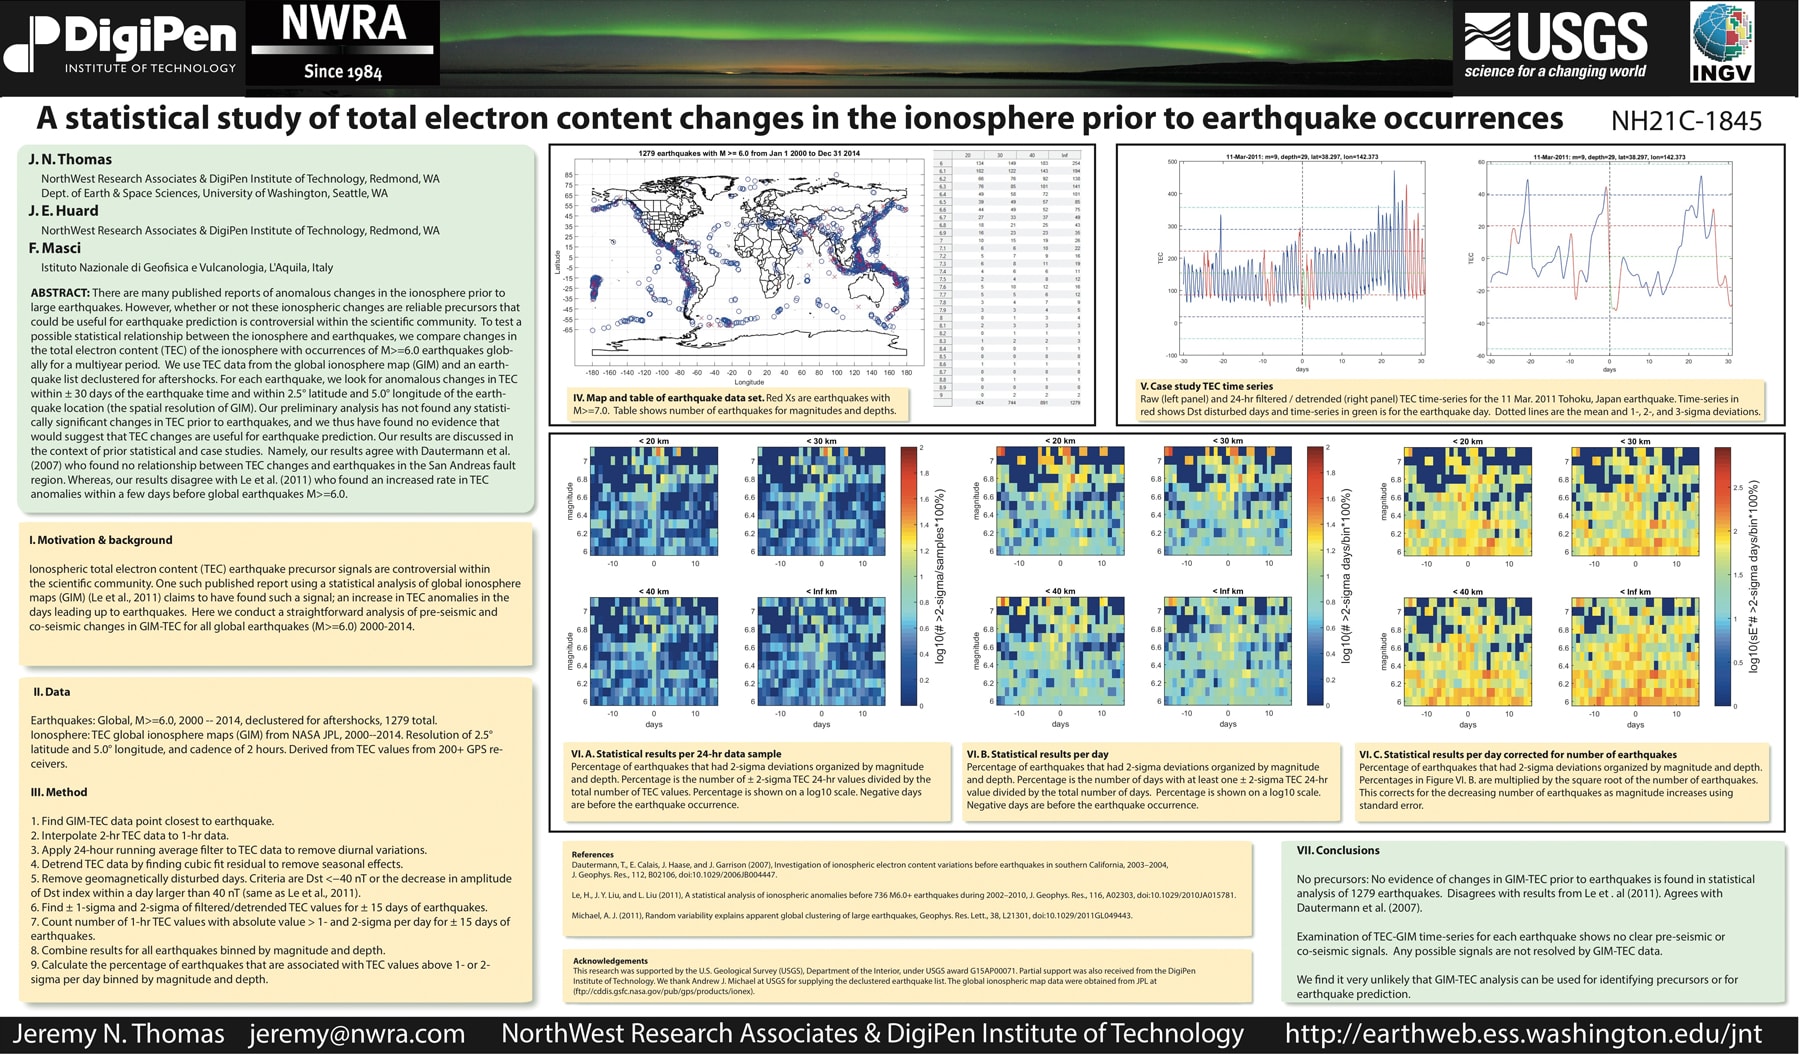 The official poster presenting the research of digipen professor Jeremy Thomas, featuring maps and graphs